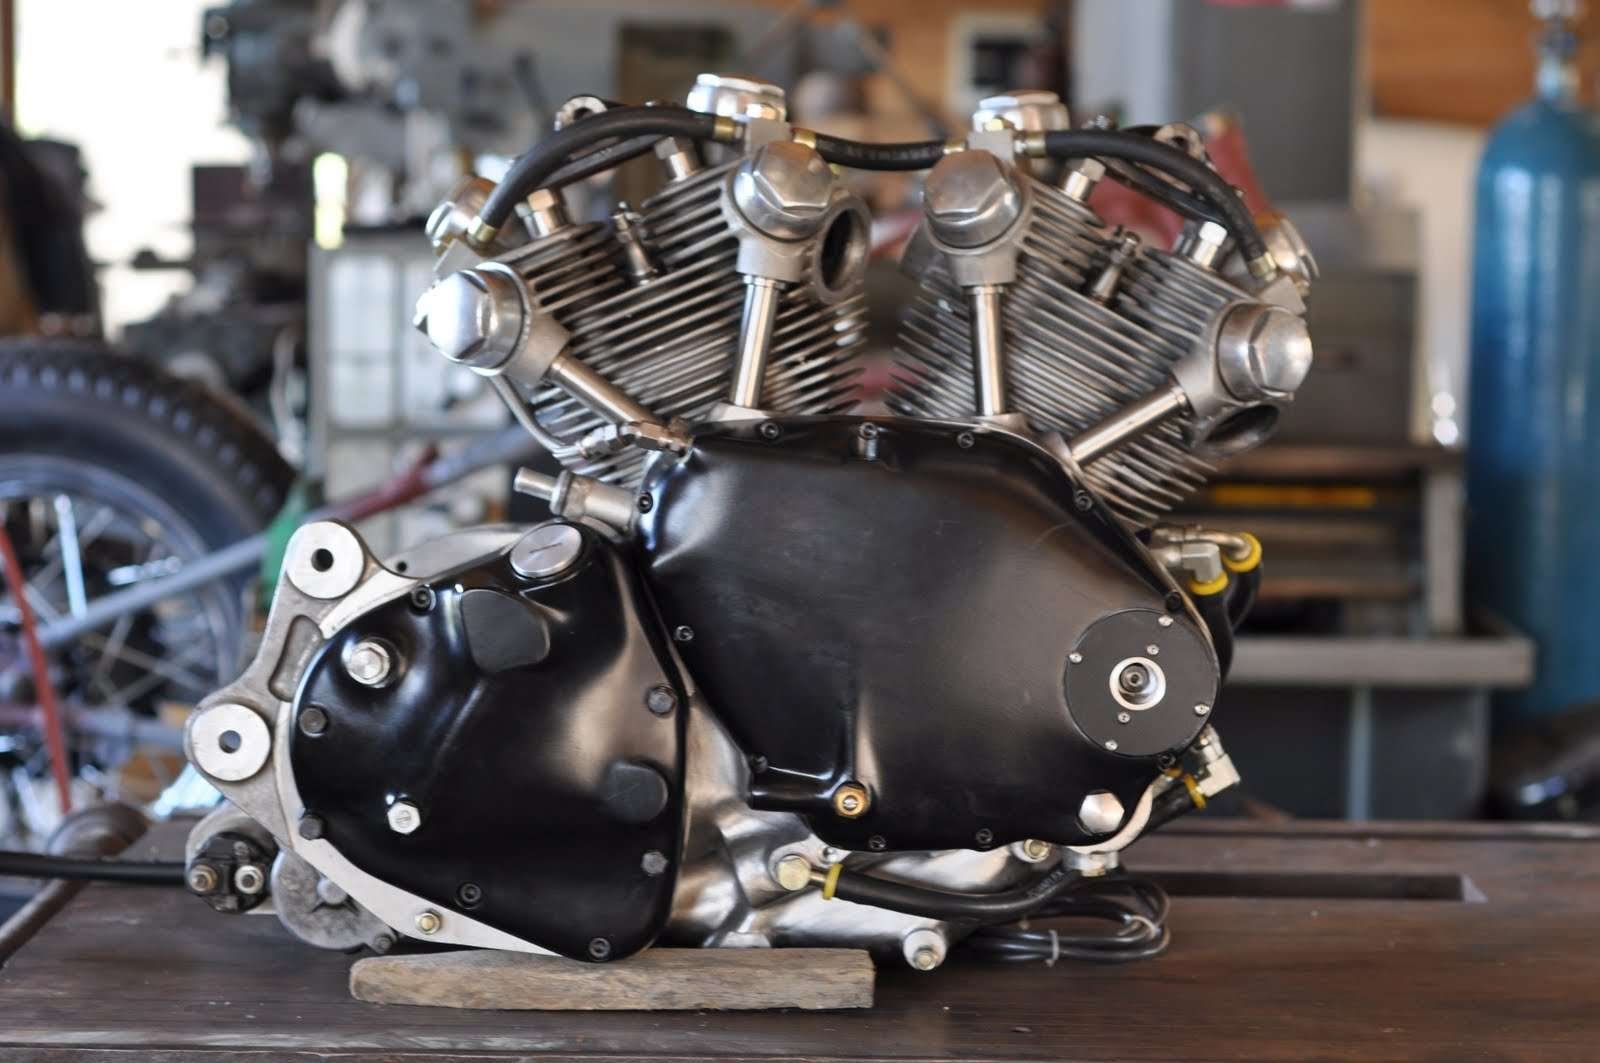 Reasons To Clean Your Motorcycle Engine